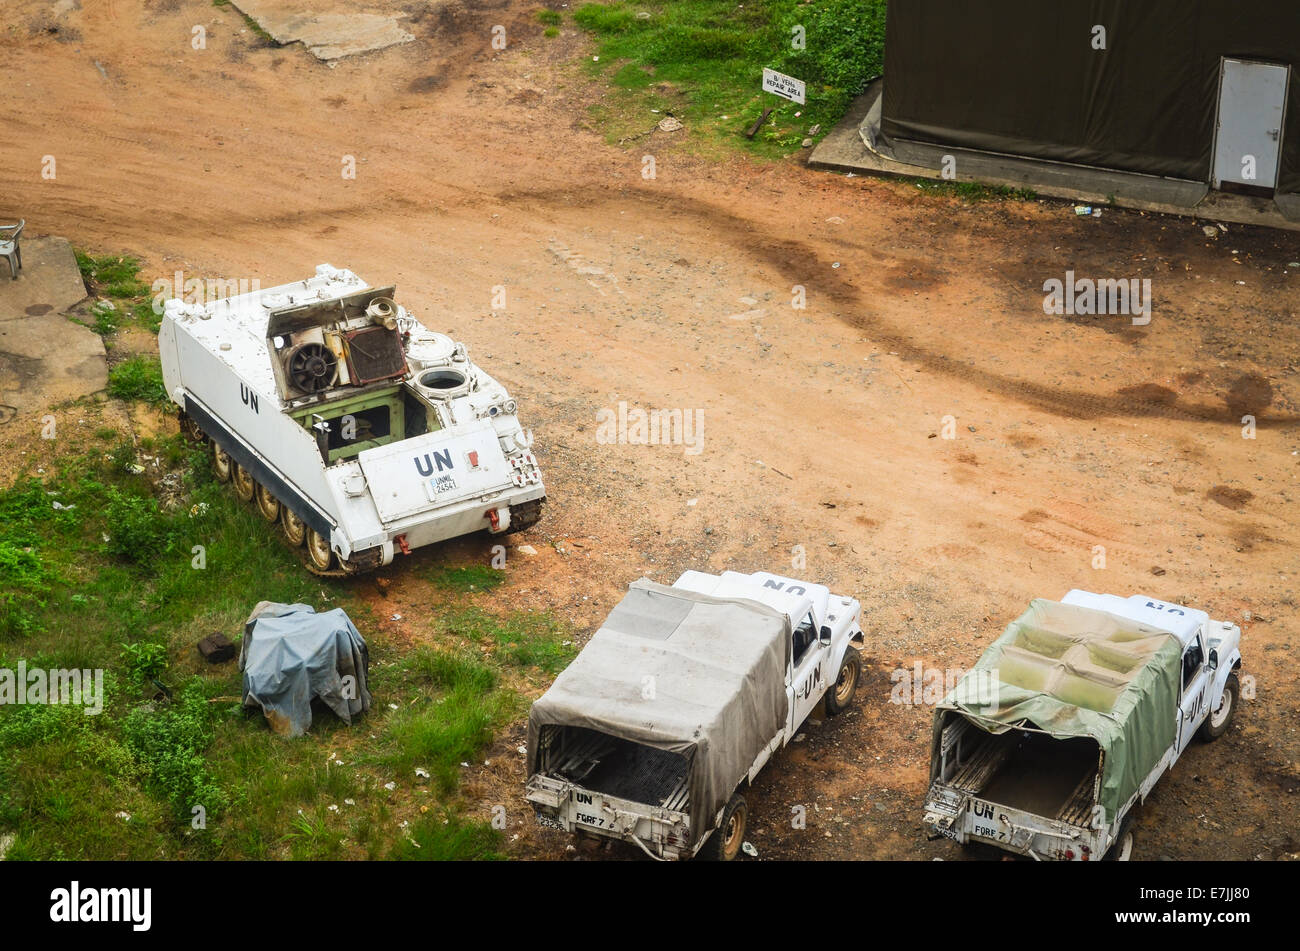 Vehicles and hangar of a UN camp in Monrovia, Liberia, seen from the top of the ruins of Hotel Africa Stock Photo